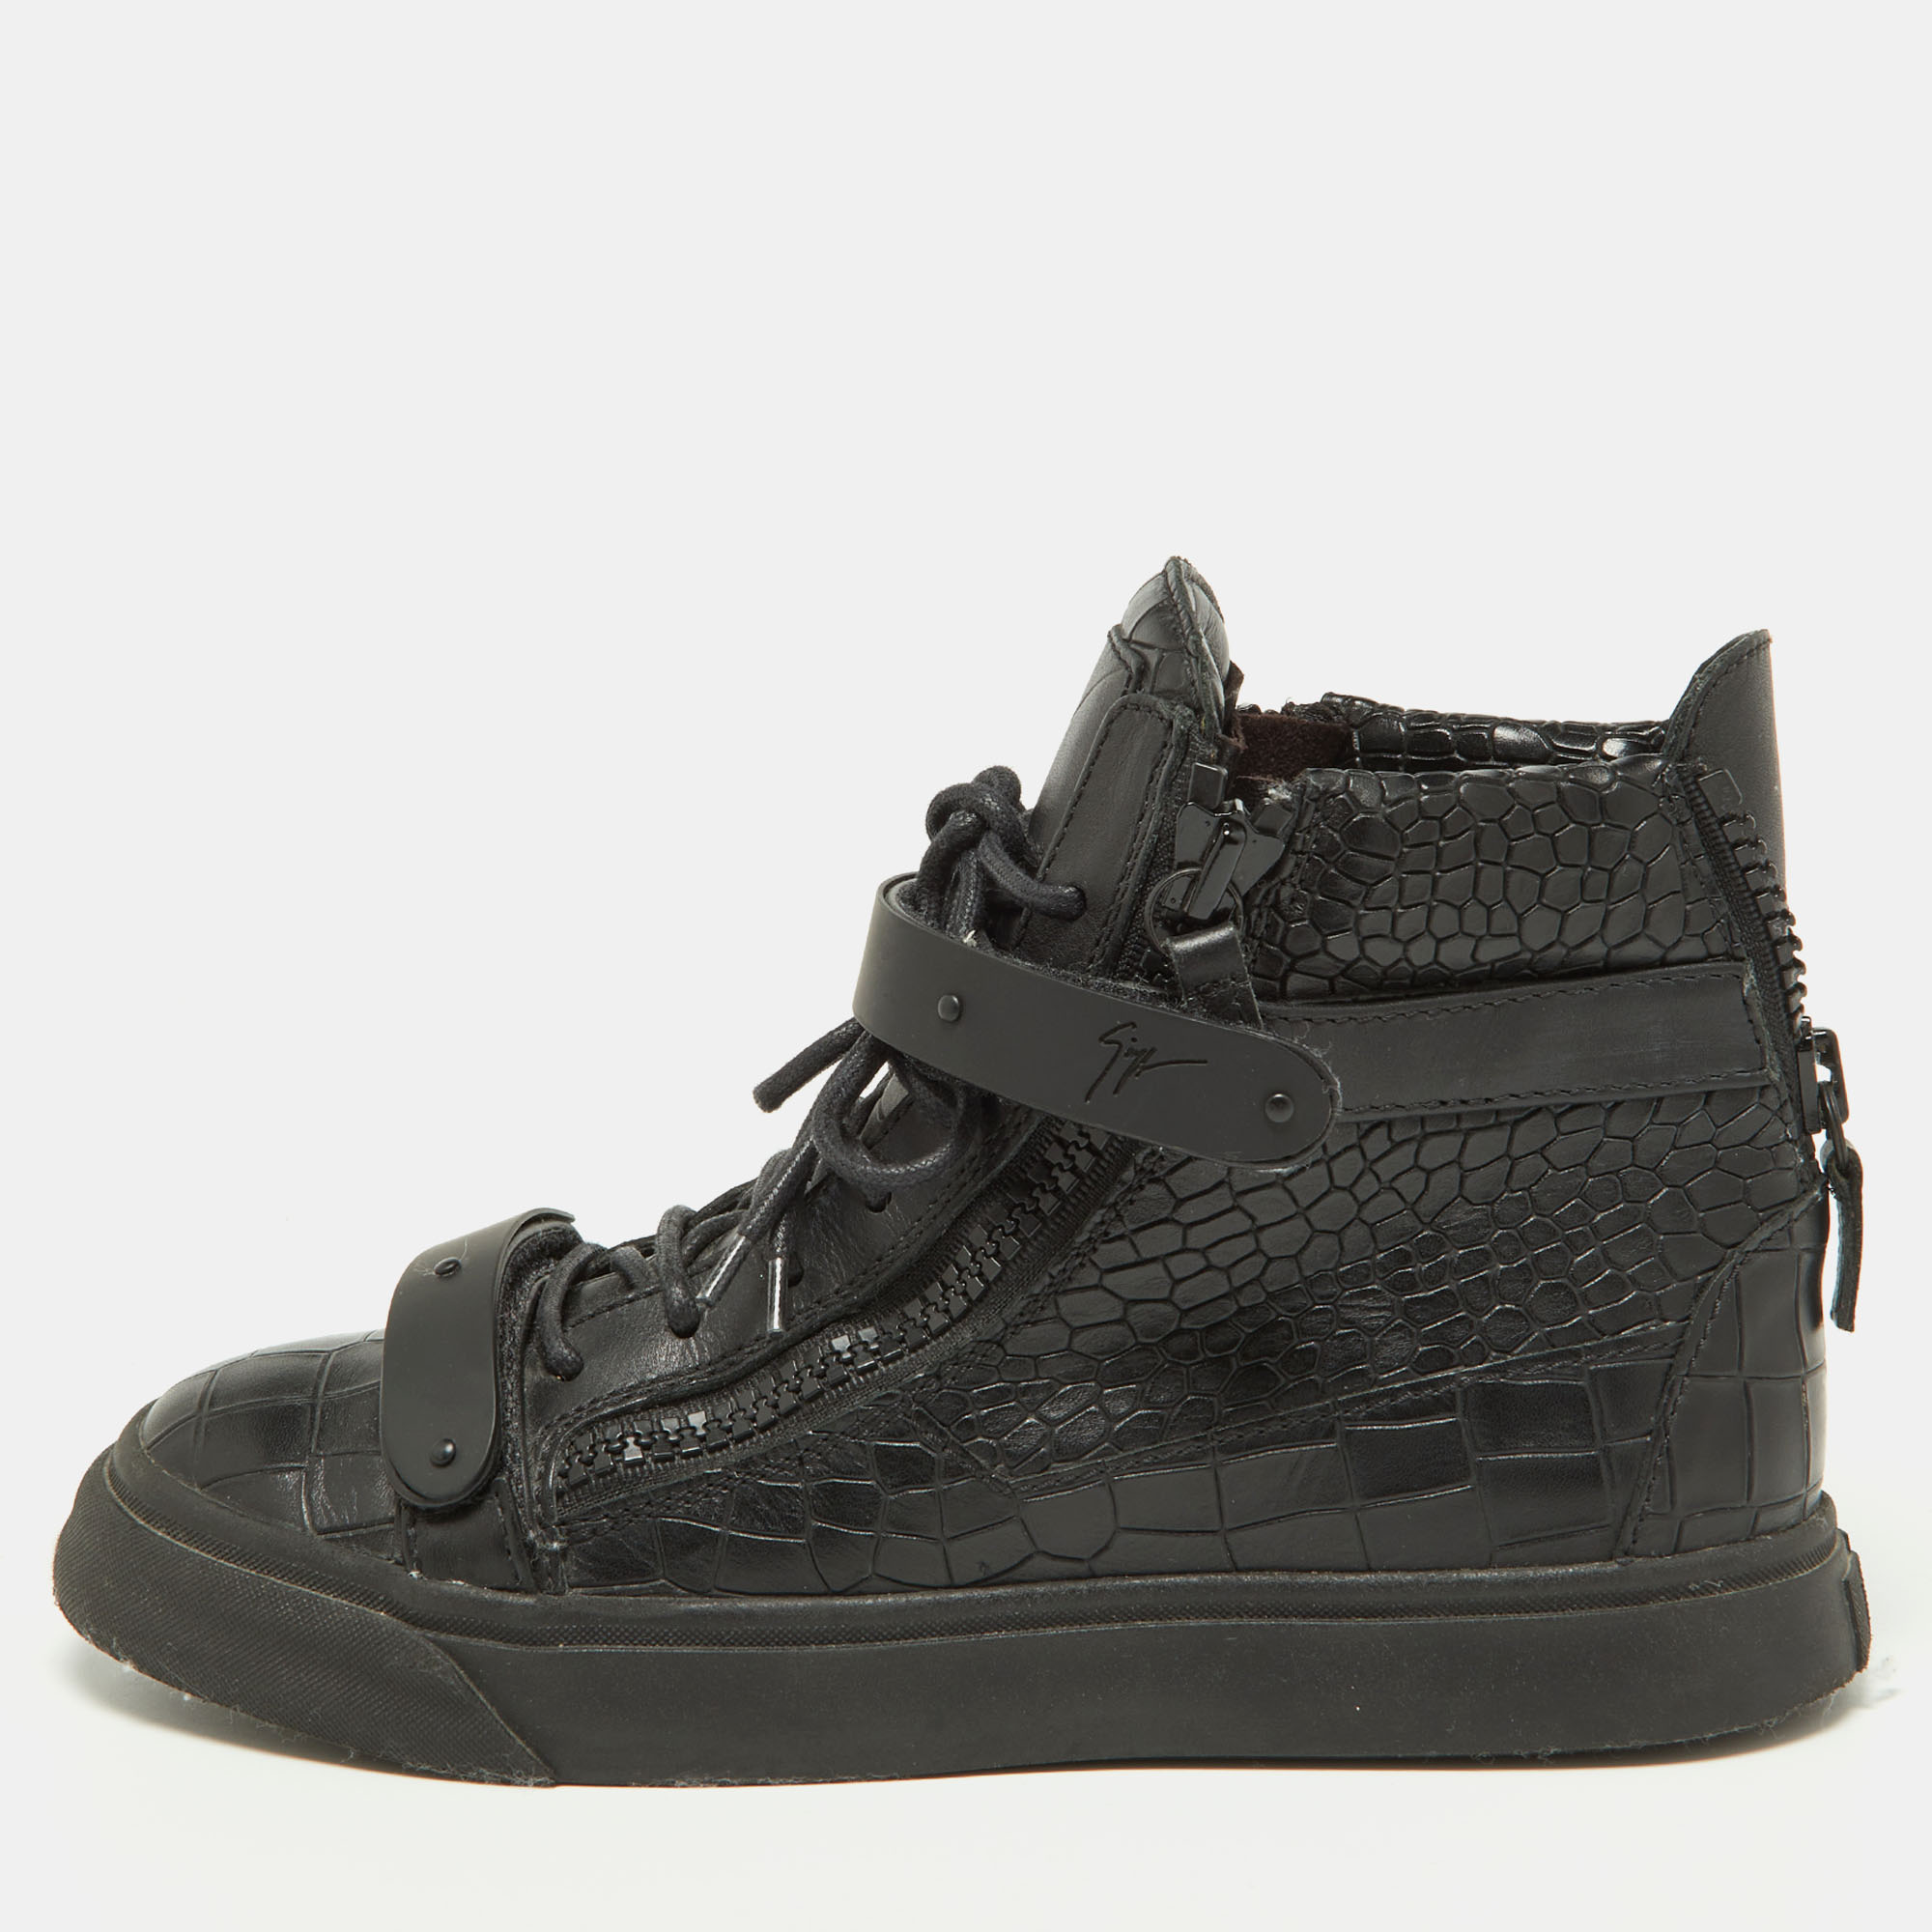 Giuseppe Zanotti Black Croc Embossed Leather Coby High Top Sneakers Size 38